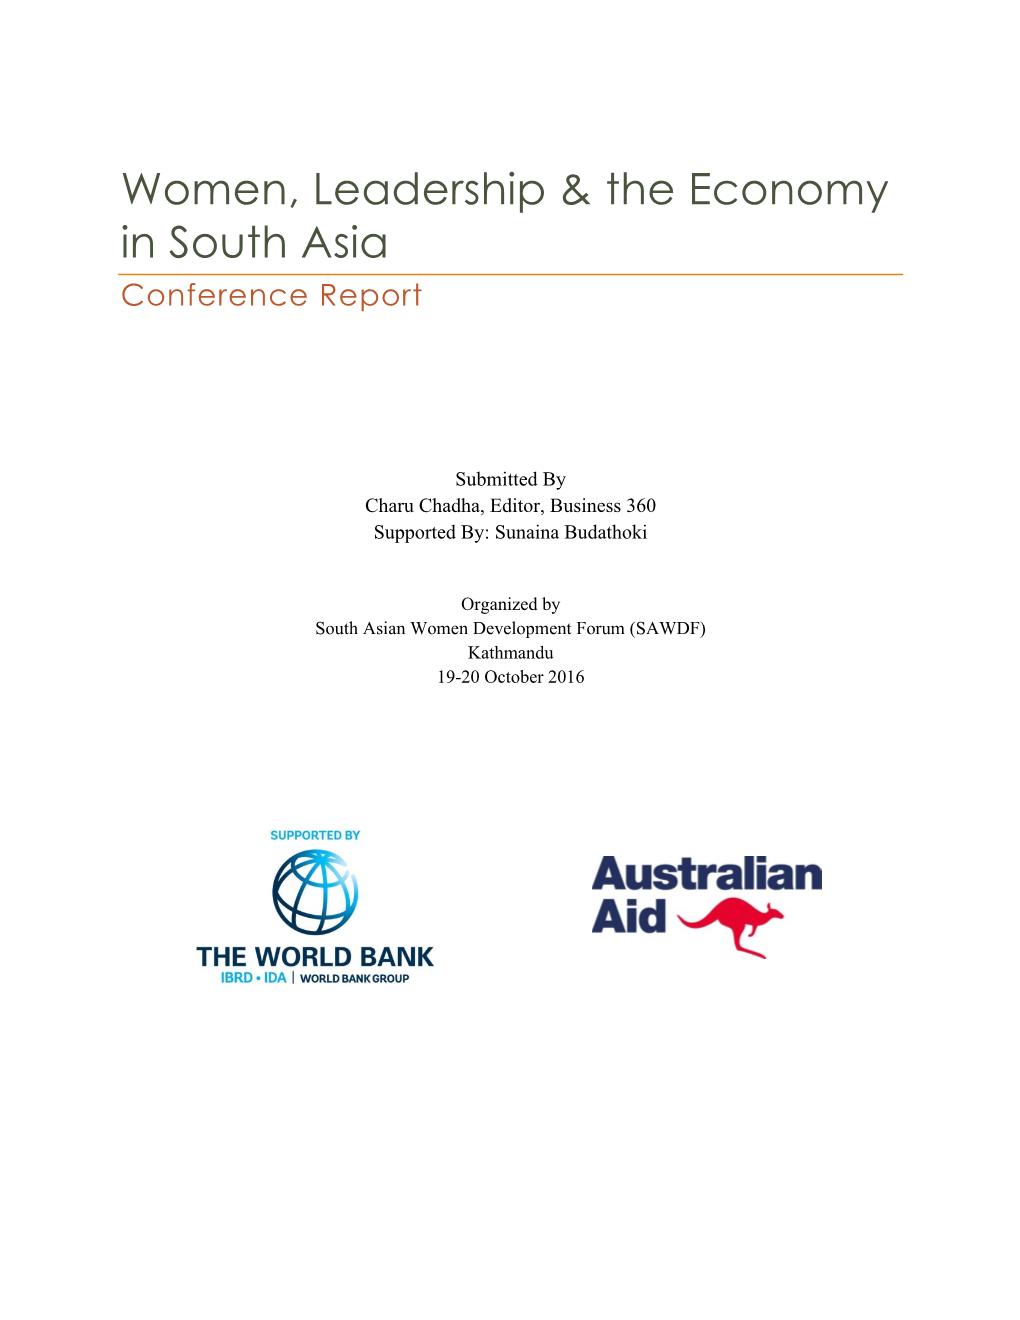 Women, Leadership & the Economy in South Asia